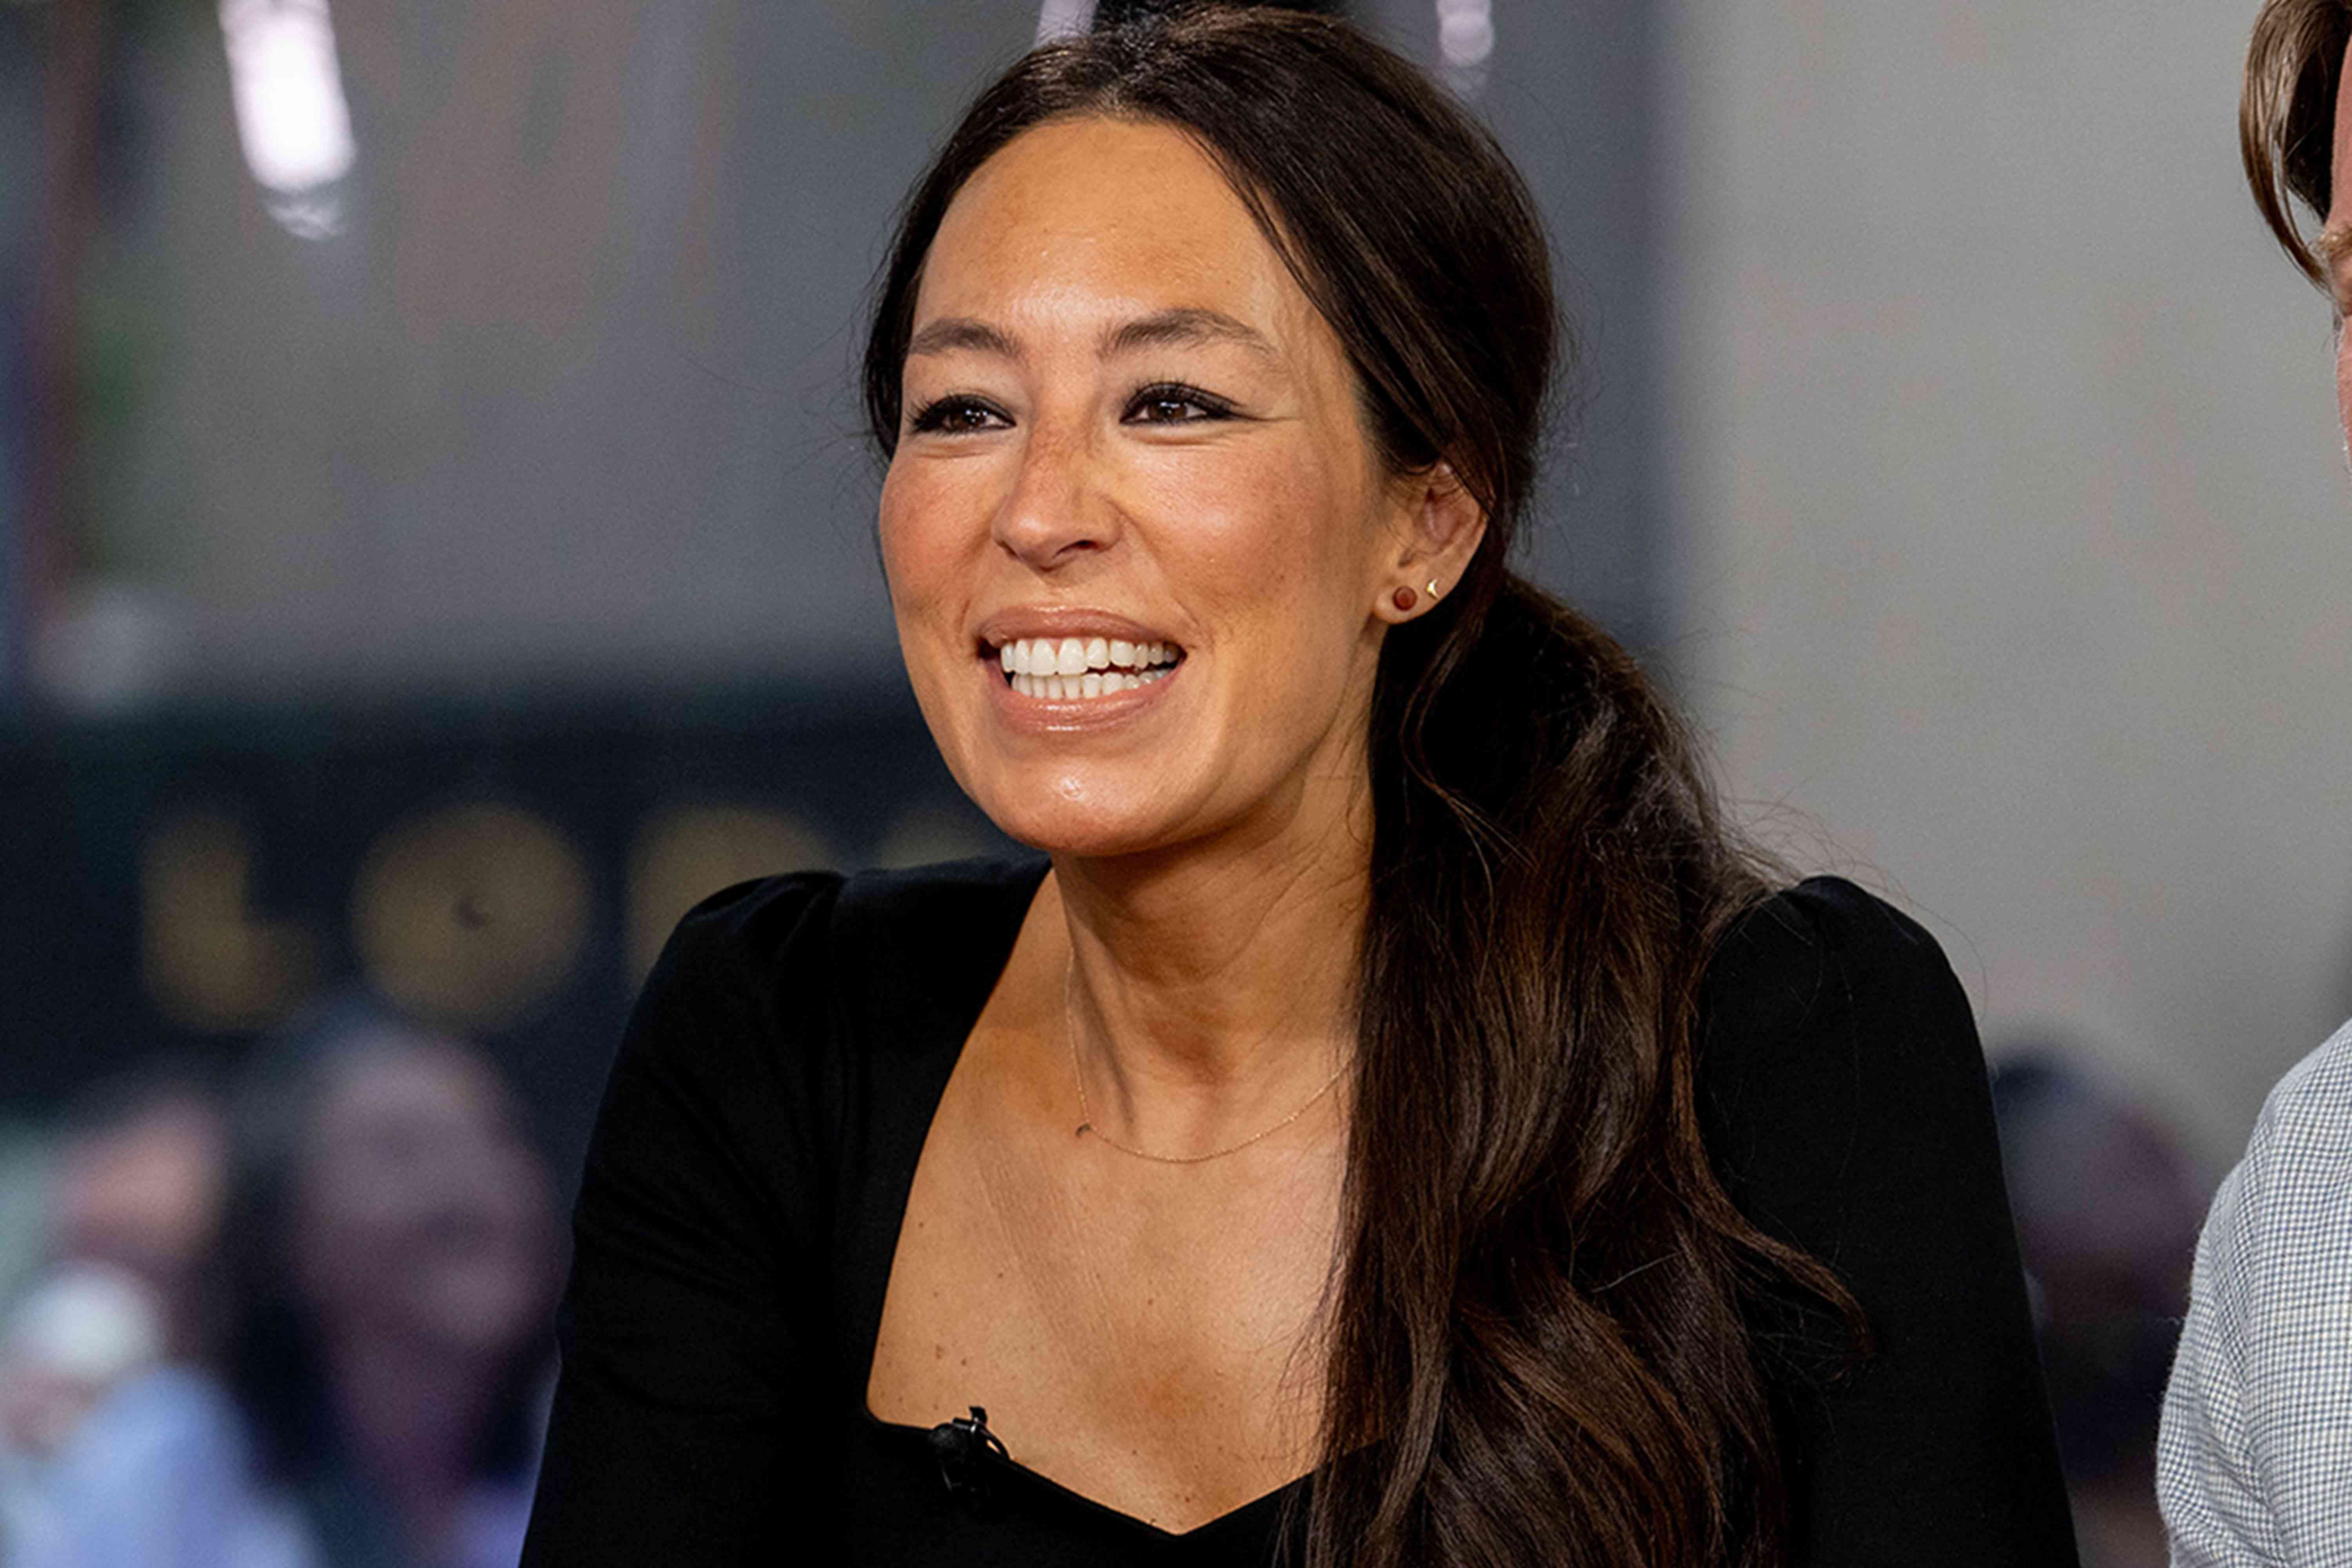 Joanna Gaines’ Flattering Black Midi Dress Resembles This $36 Option That’s ‘Perfect for Summer’